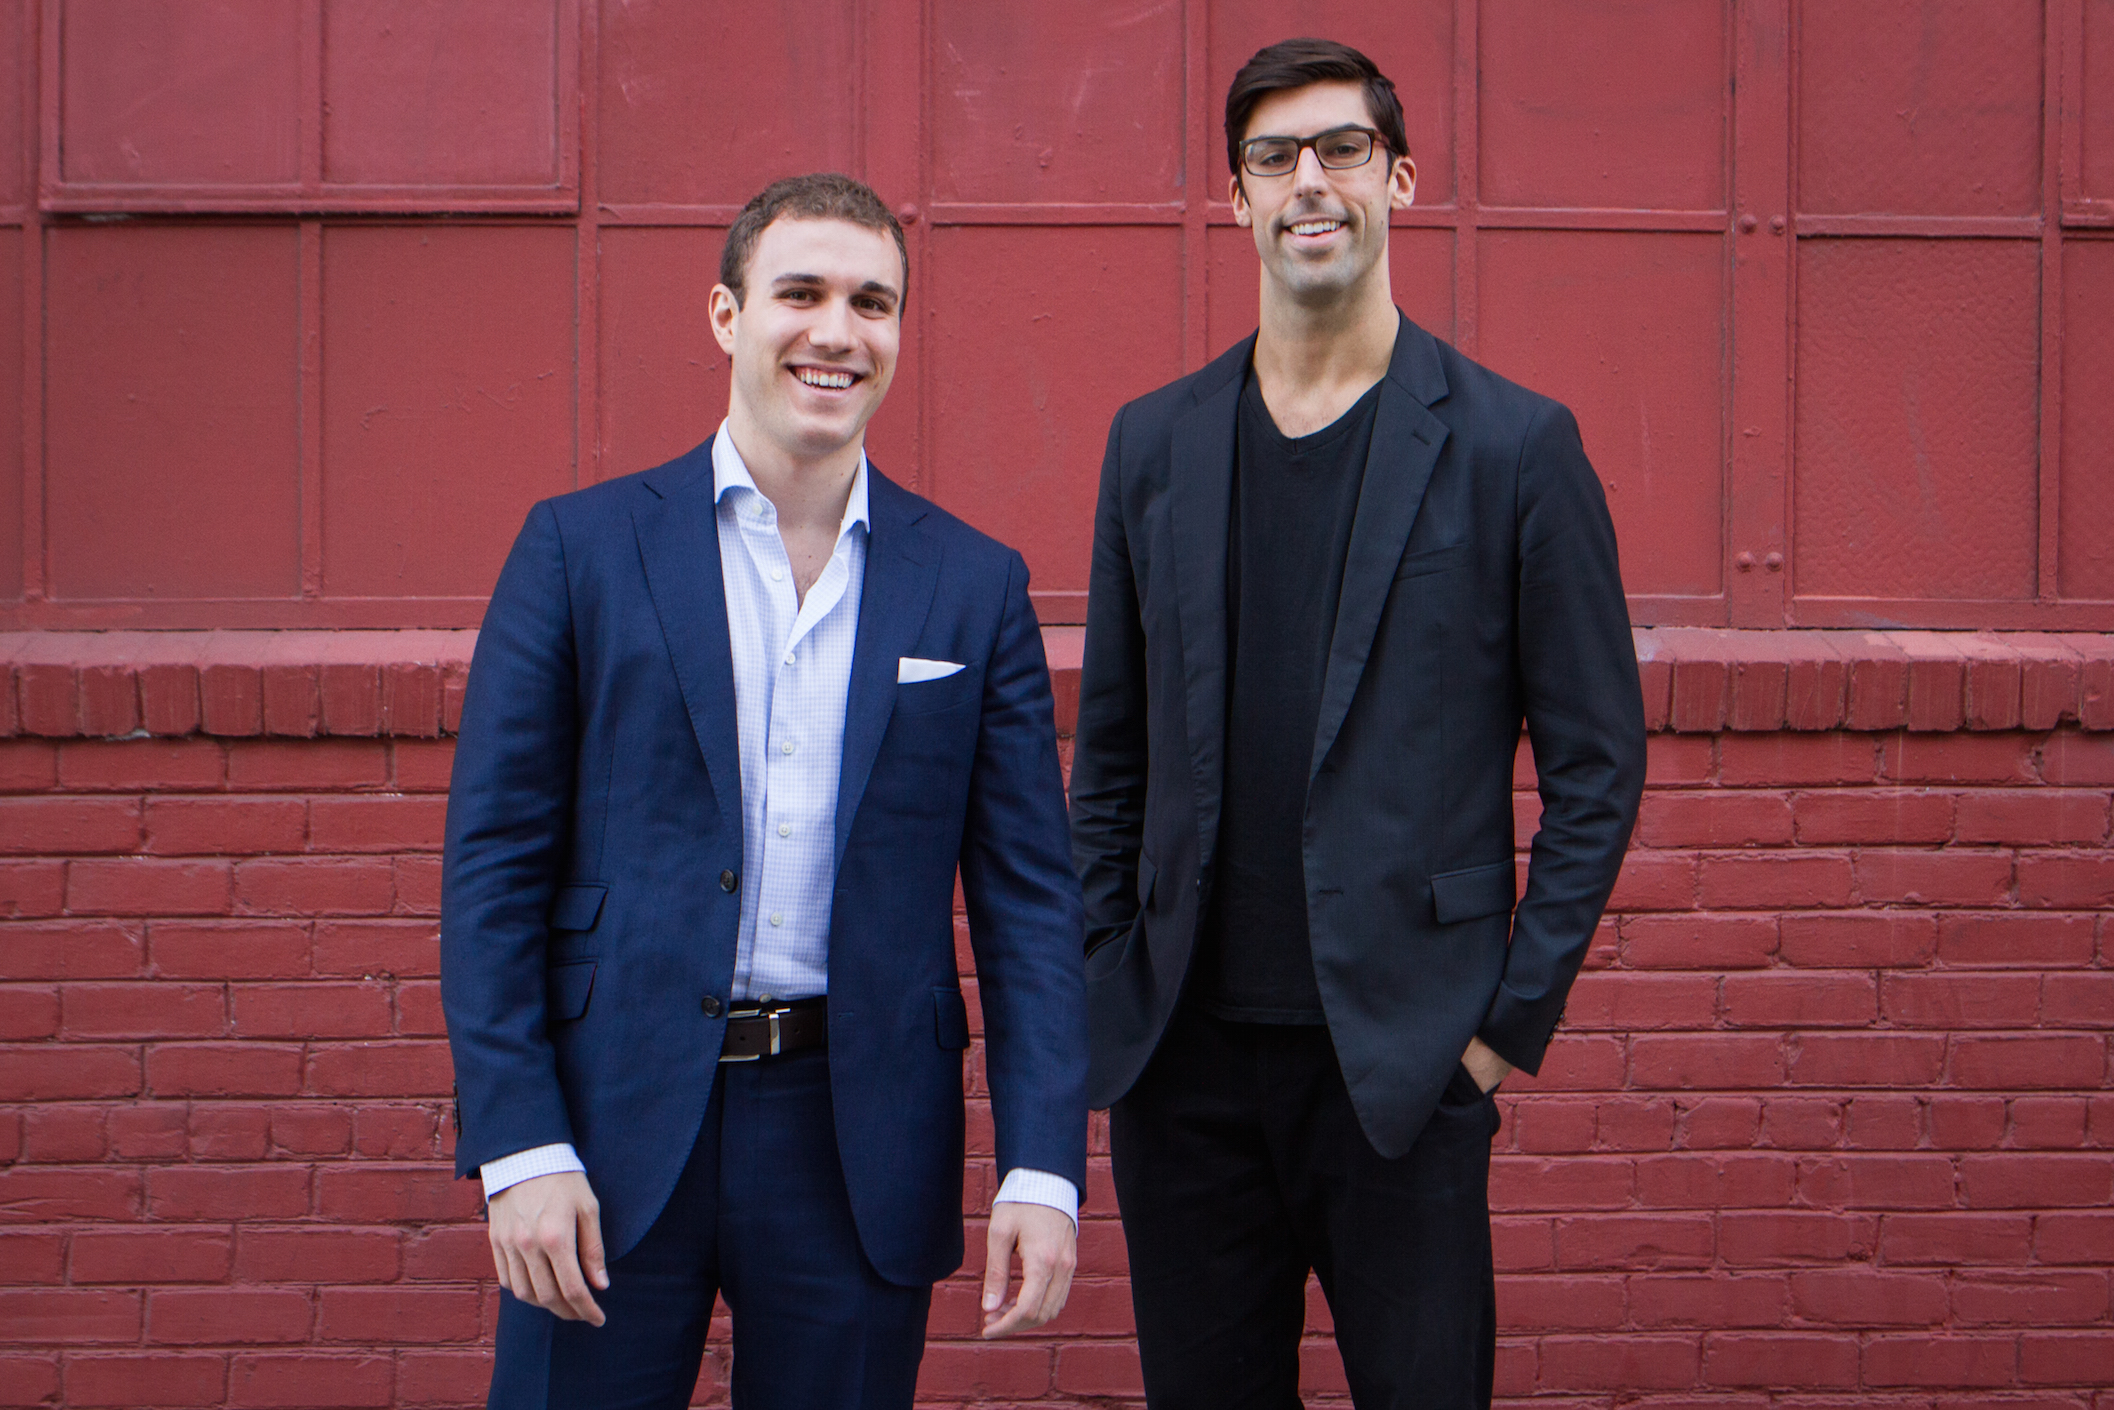 Jon Jacques and Dan Ragan, Co-Founders of Applause: The World's First Periscope Influencer Network